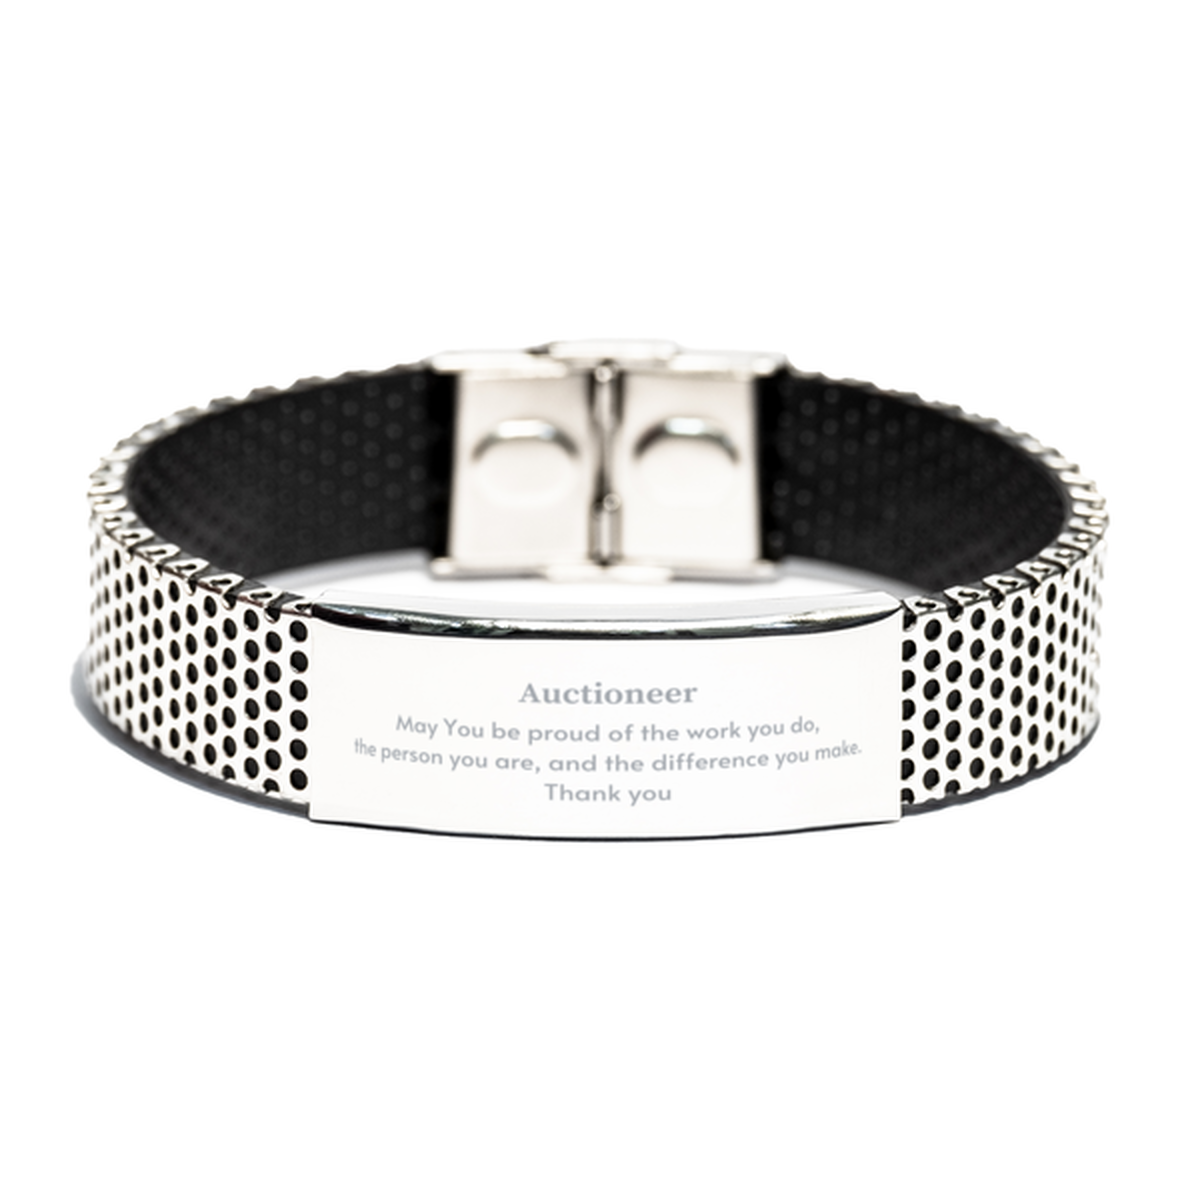 Heartwarming Stainless Steel Bracelet Retirement Coworkers Gifts for Auctioneer, Auctioneer May You be proud of the work you do, the person you are Gifts for Boss Men Women Friends